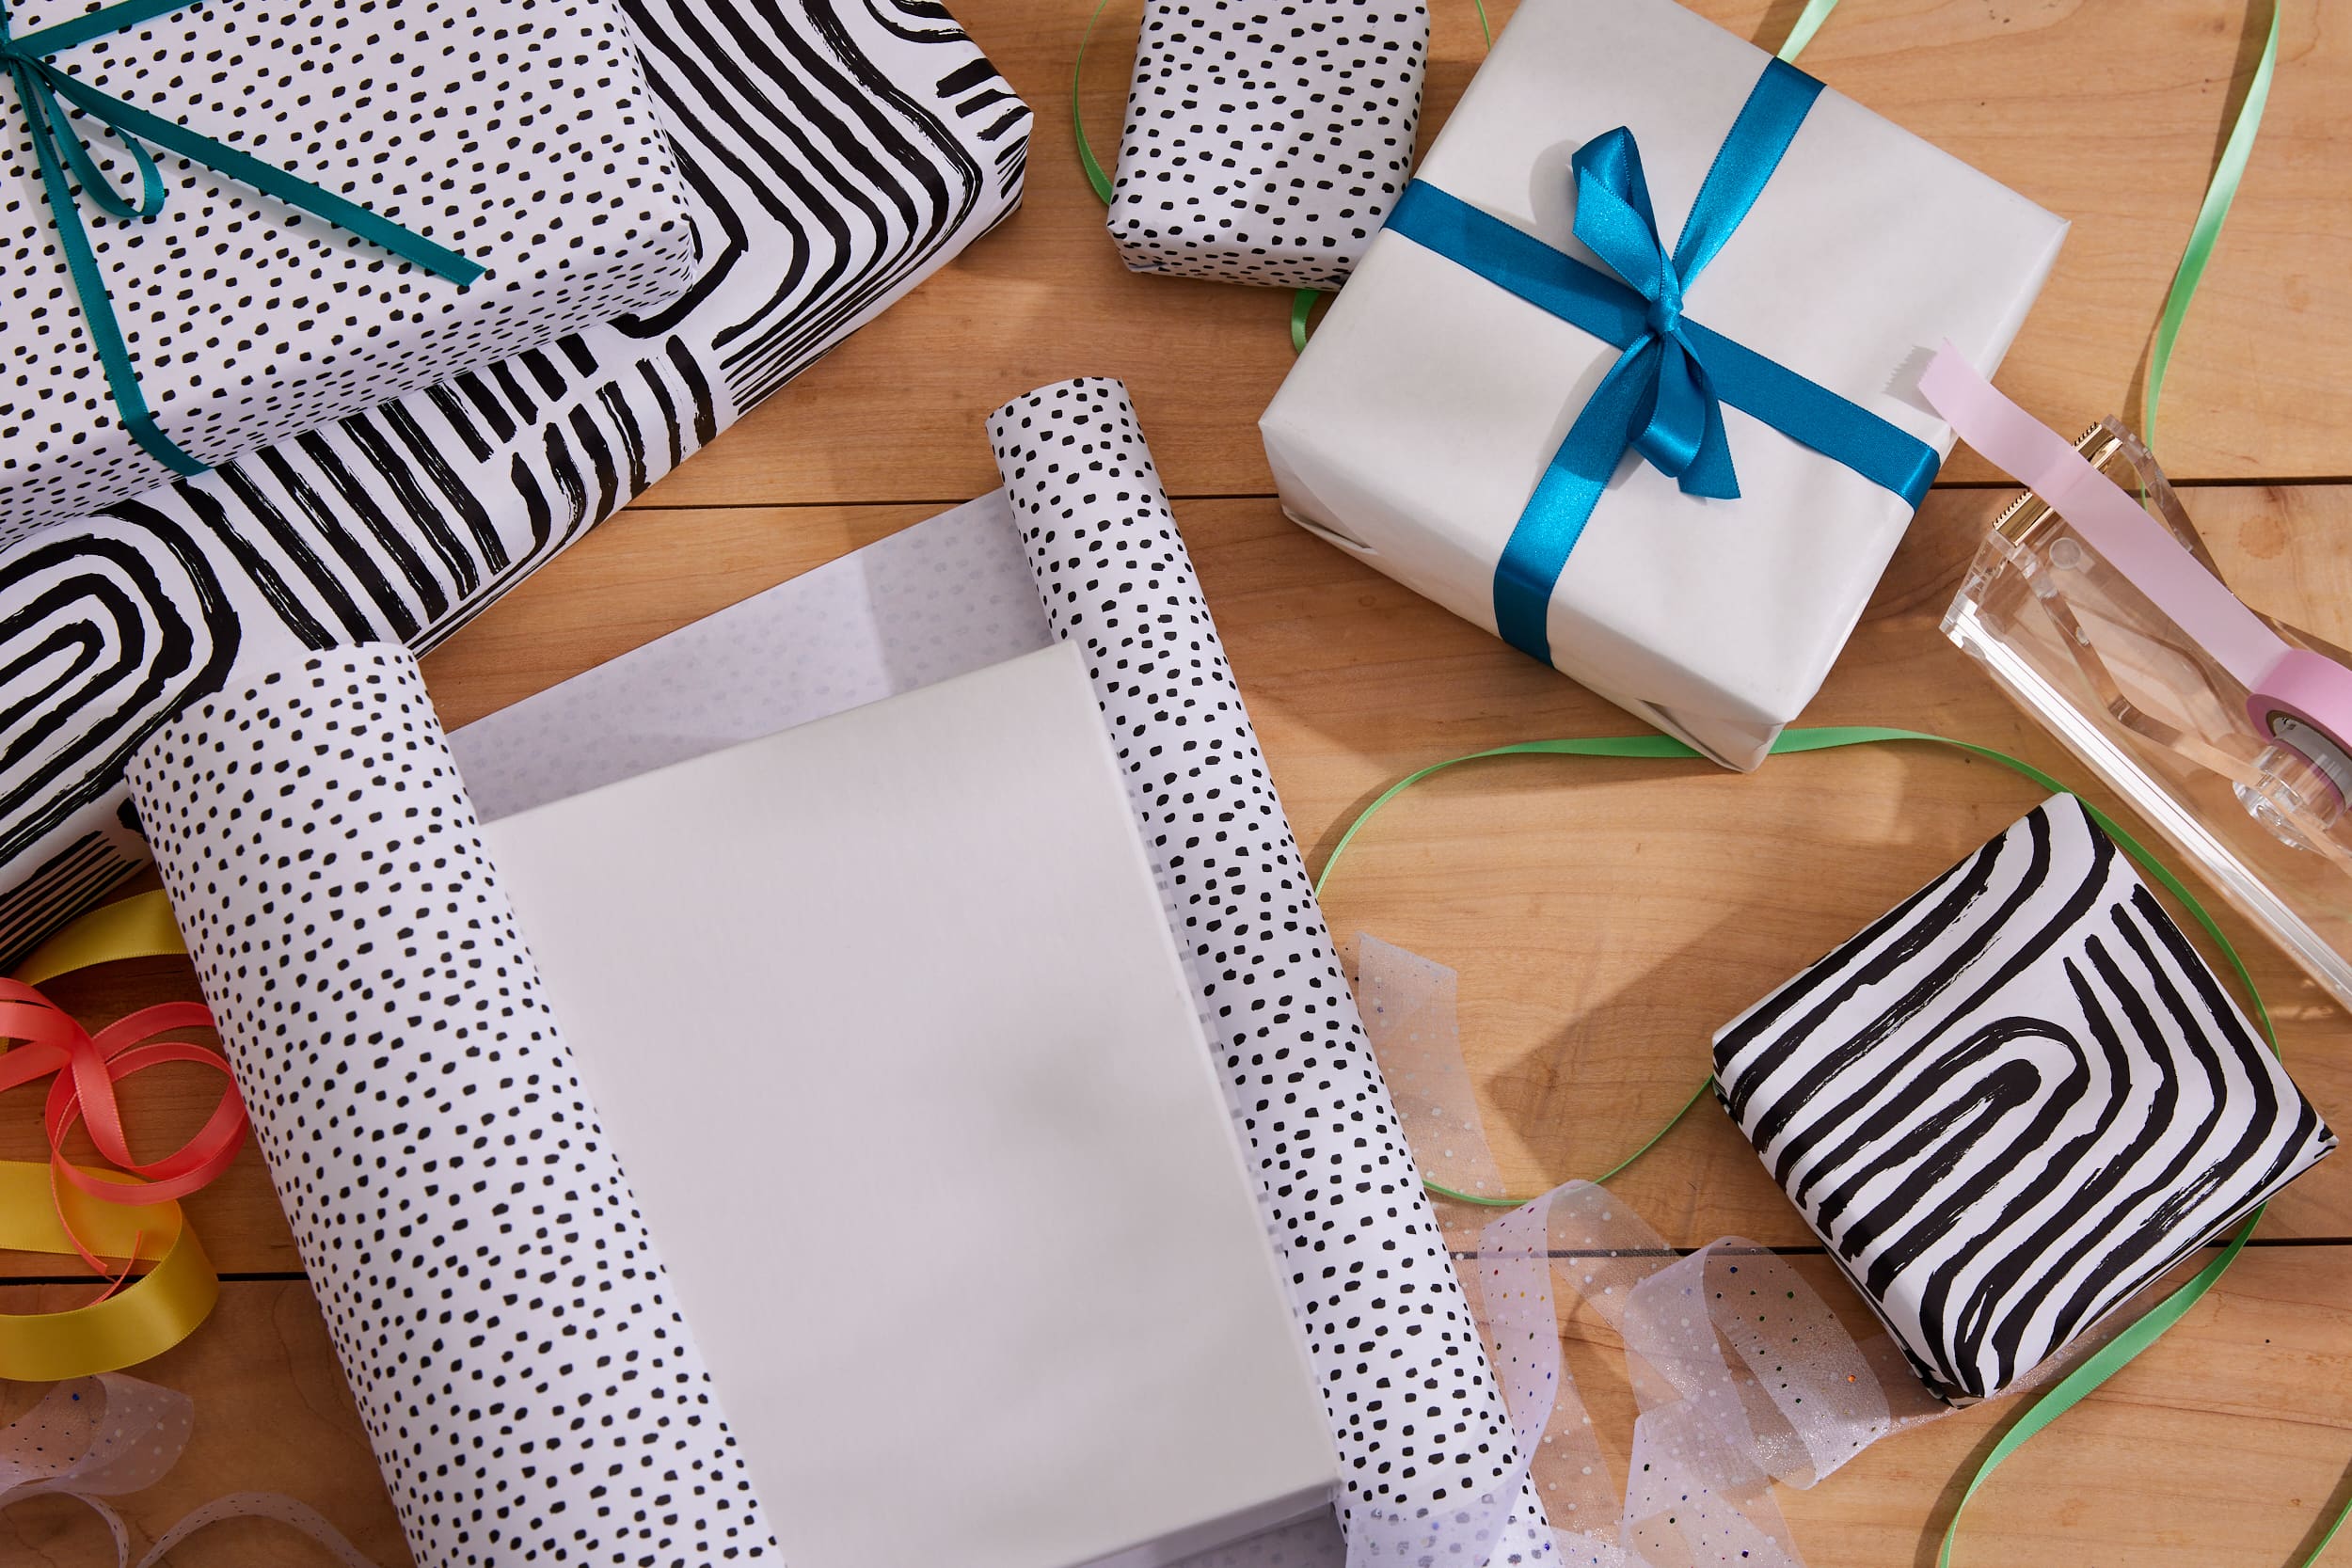 Wrap Buddies  Tabletop Gift Wrapping Tool 